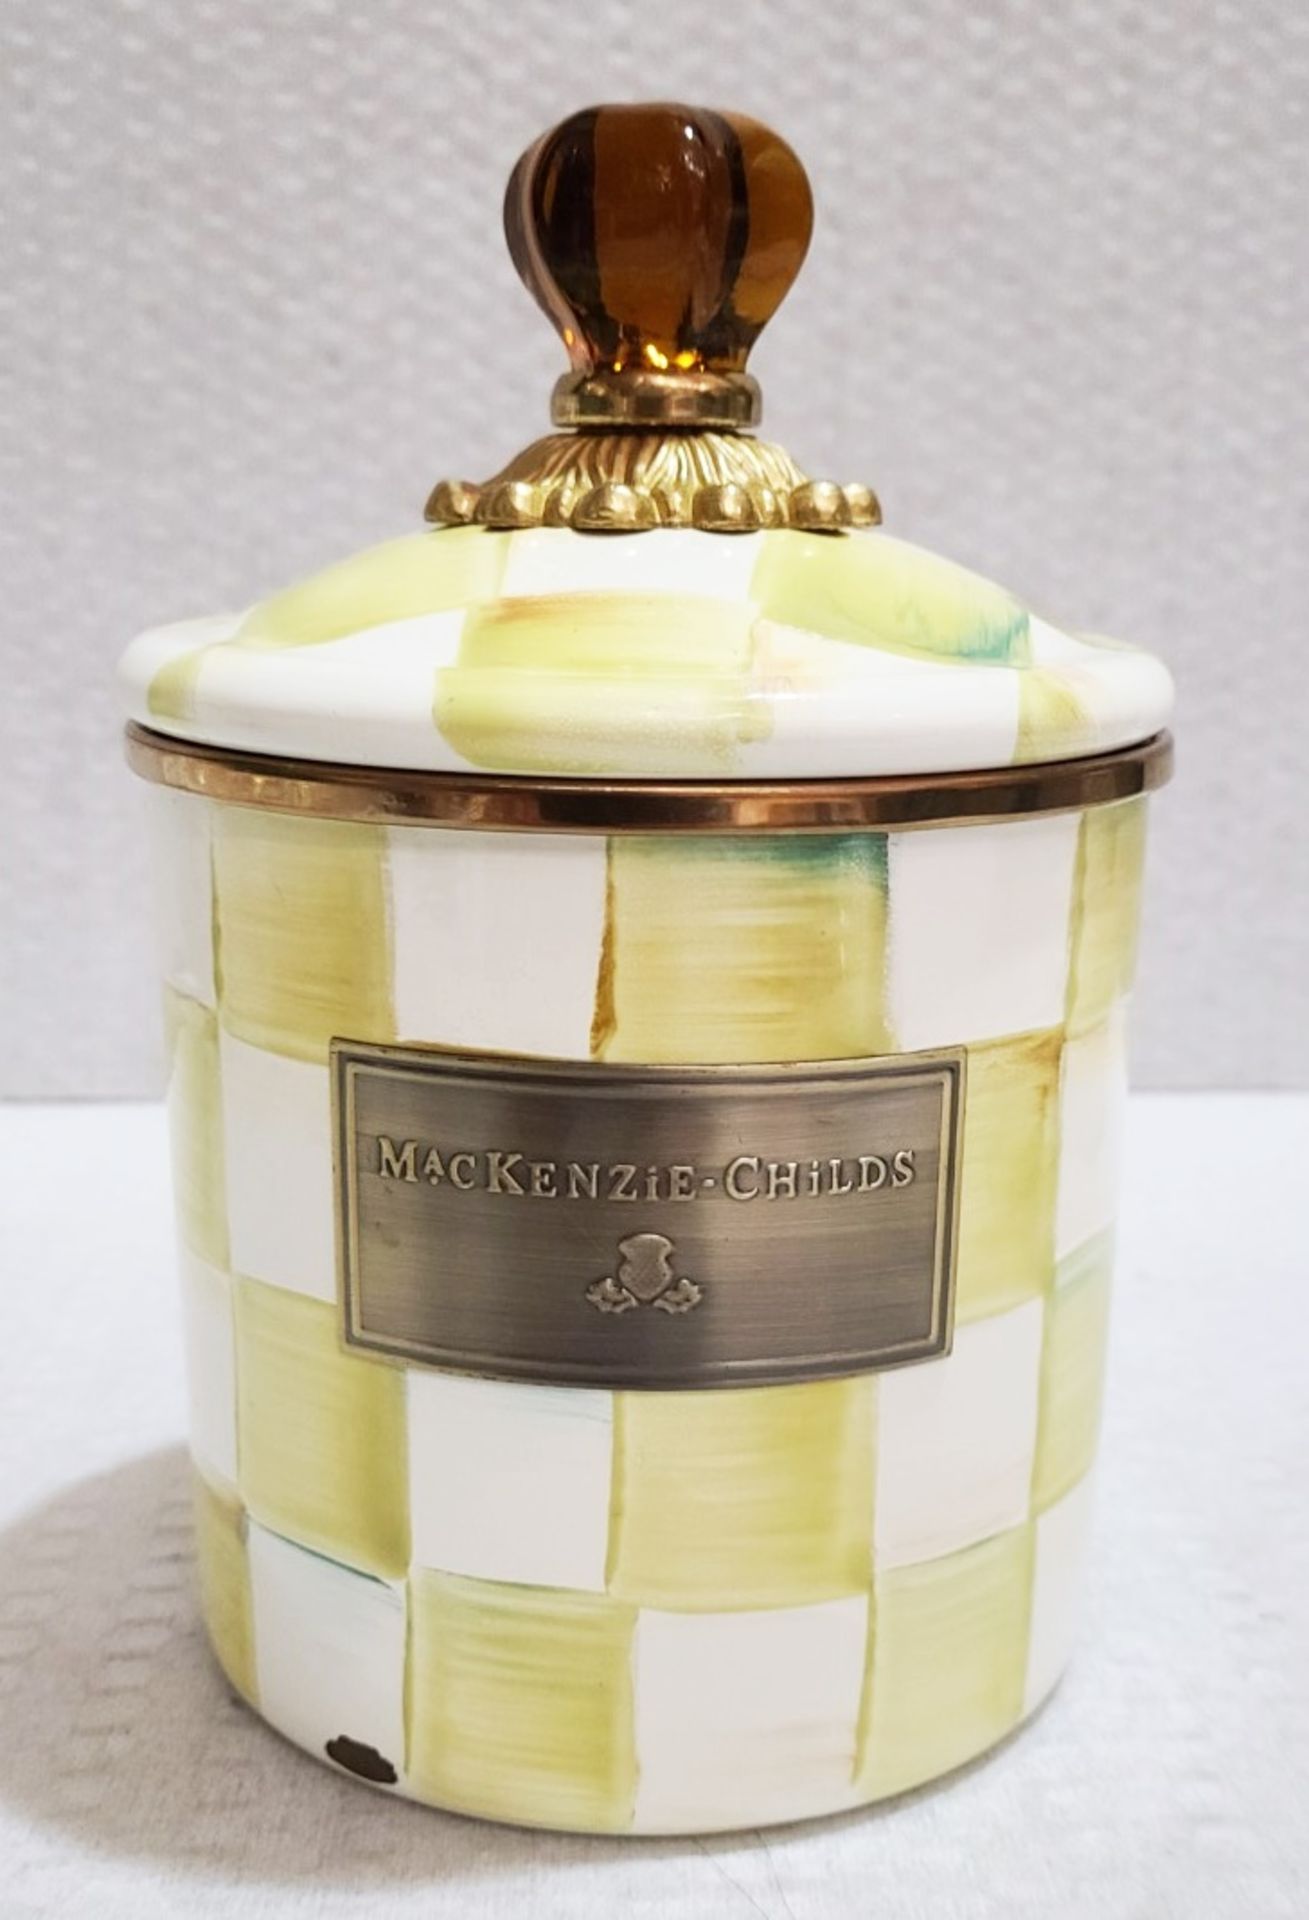 1 x MACKENZIE CHILDS Small Parchment Check Enamel Canister - Original Price £115.00